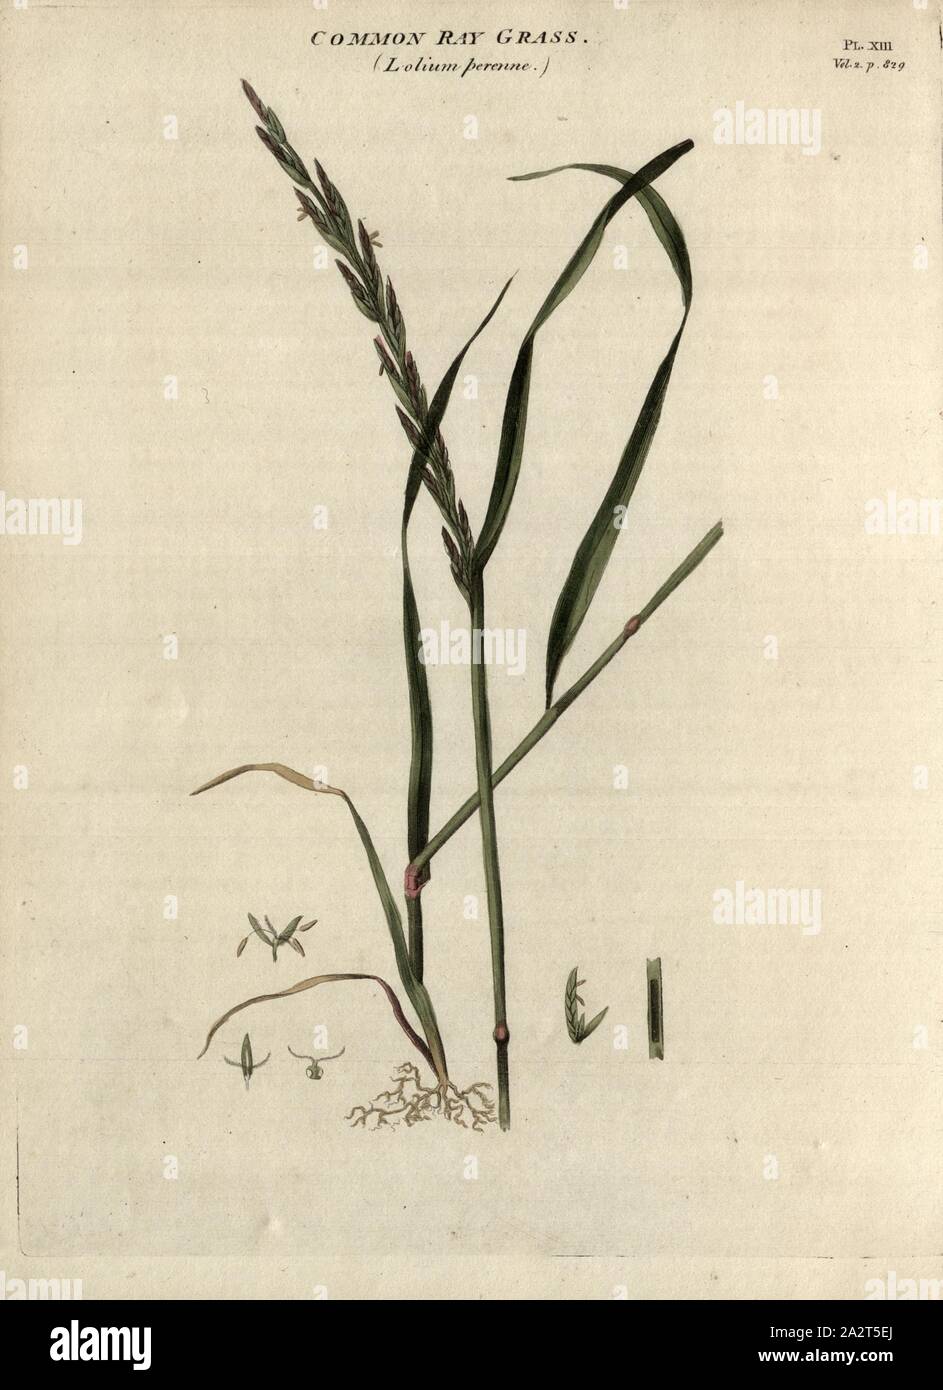 Common Ray Grass (Lolium perenne), Perennial ryegrass, Fig. 13, Pl. XIII, after p. 828, R.W. Dickson: Practical agriculture, or, a complete system of modern husbandry: with the methods of planting, and the management of live stock. Bd. 2. London: printed for Richard Phillips; by R. Taylor and Co., 1805 Stock Photo